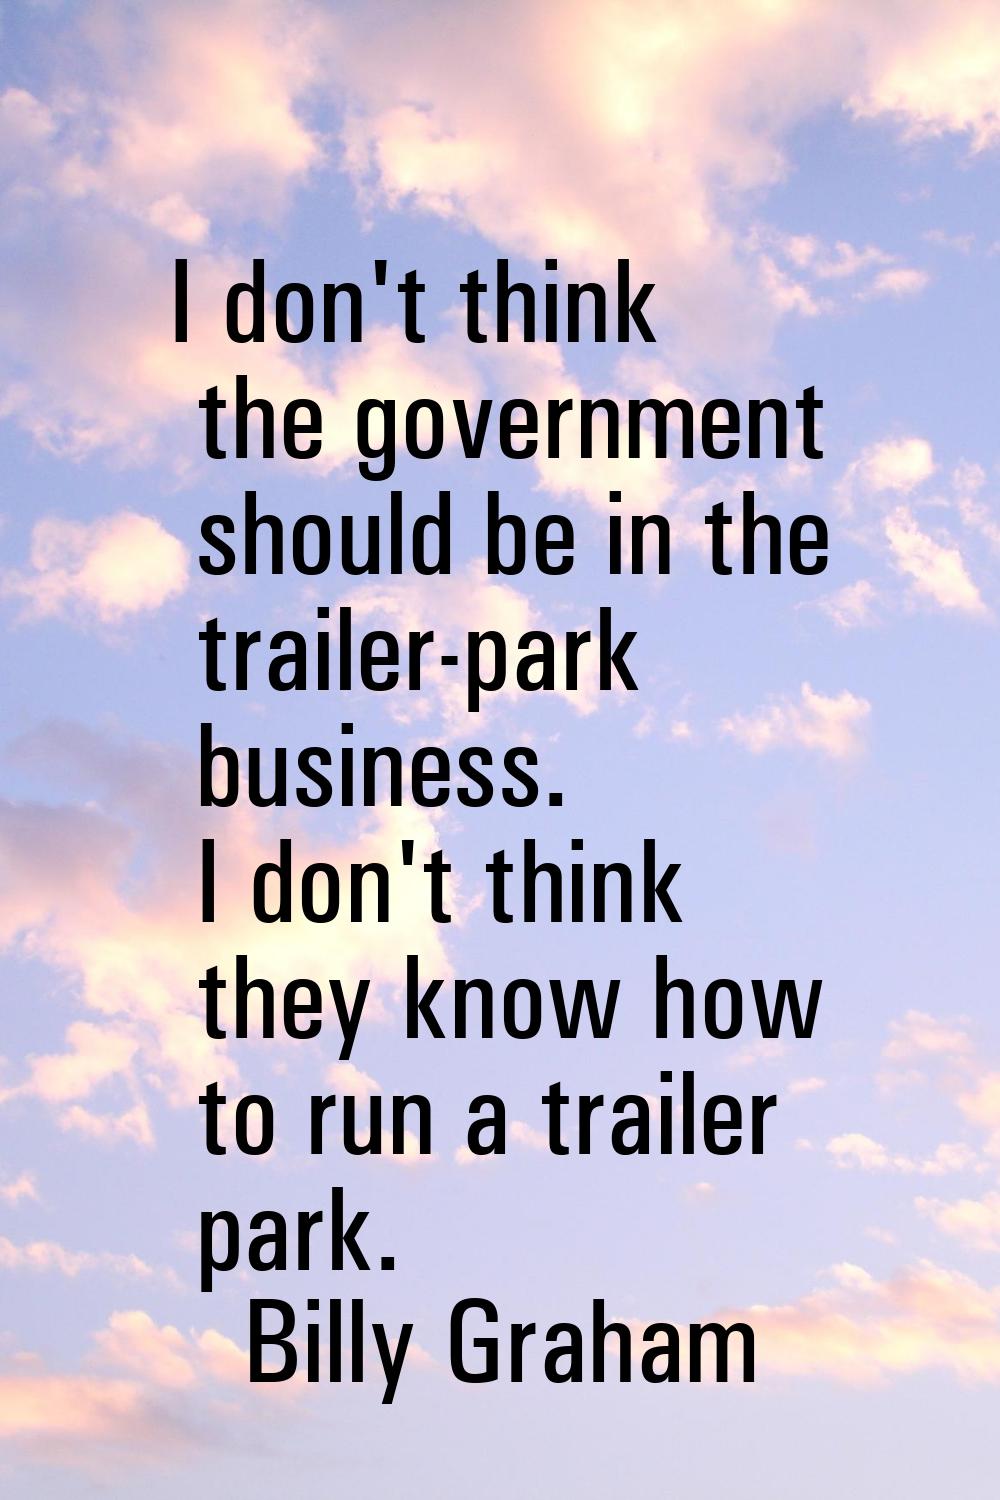 I don't think the government should be in the trailer-park business. I don't think they know how to